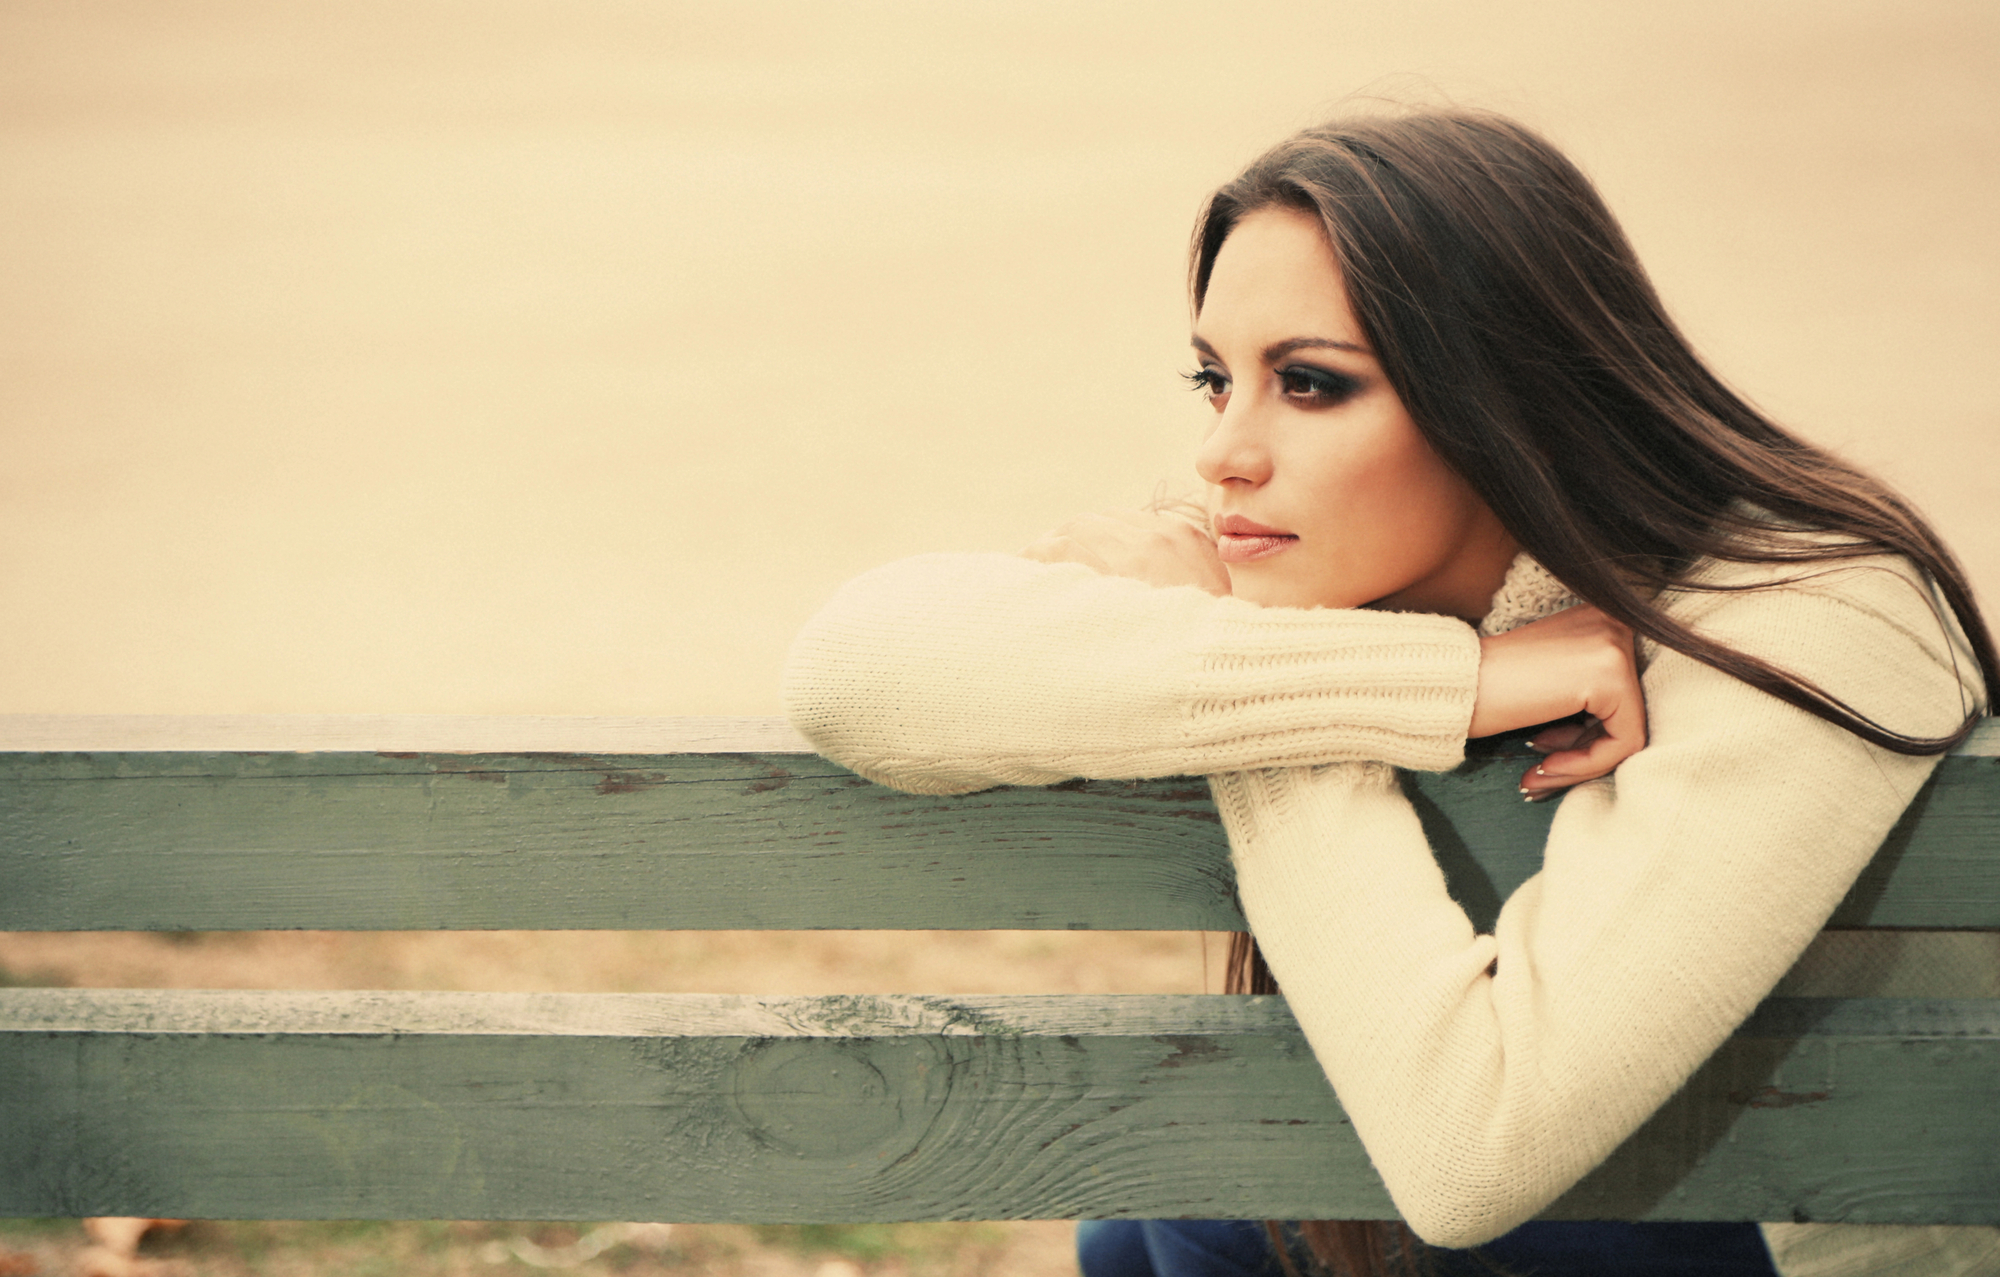 A woman with long brown hair and a cream sweater rests her arms on the back of a weathered wooden bench, gazing thoughtfully into the distance. The background is blurred, suggesting an outdoor setting on a calm day.